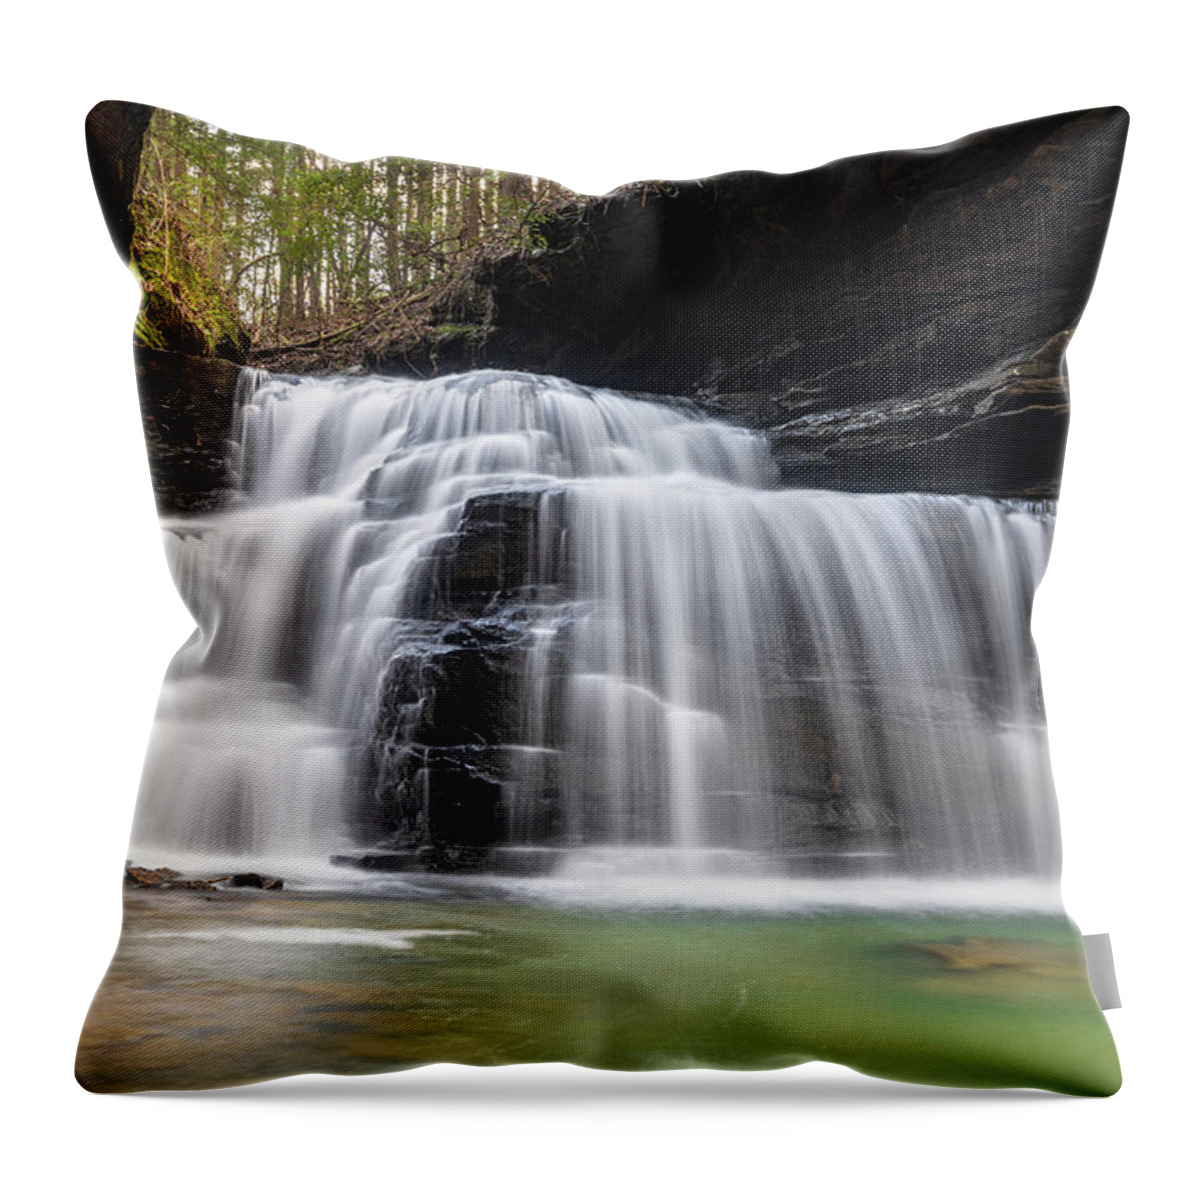 Waterfall Throw Pillow featuring the photograph All About Waterfalls by Jordan Hill